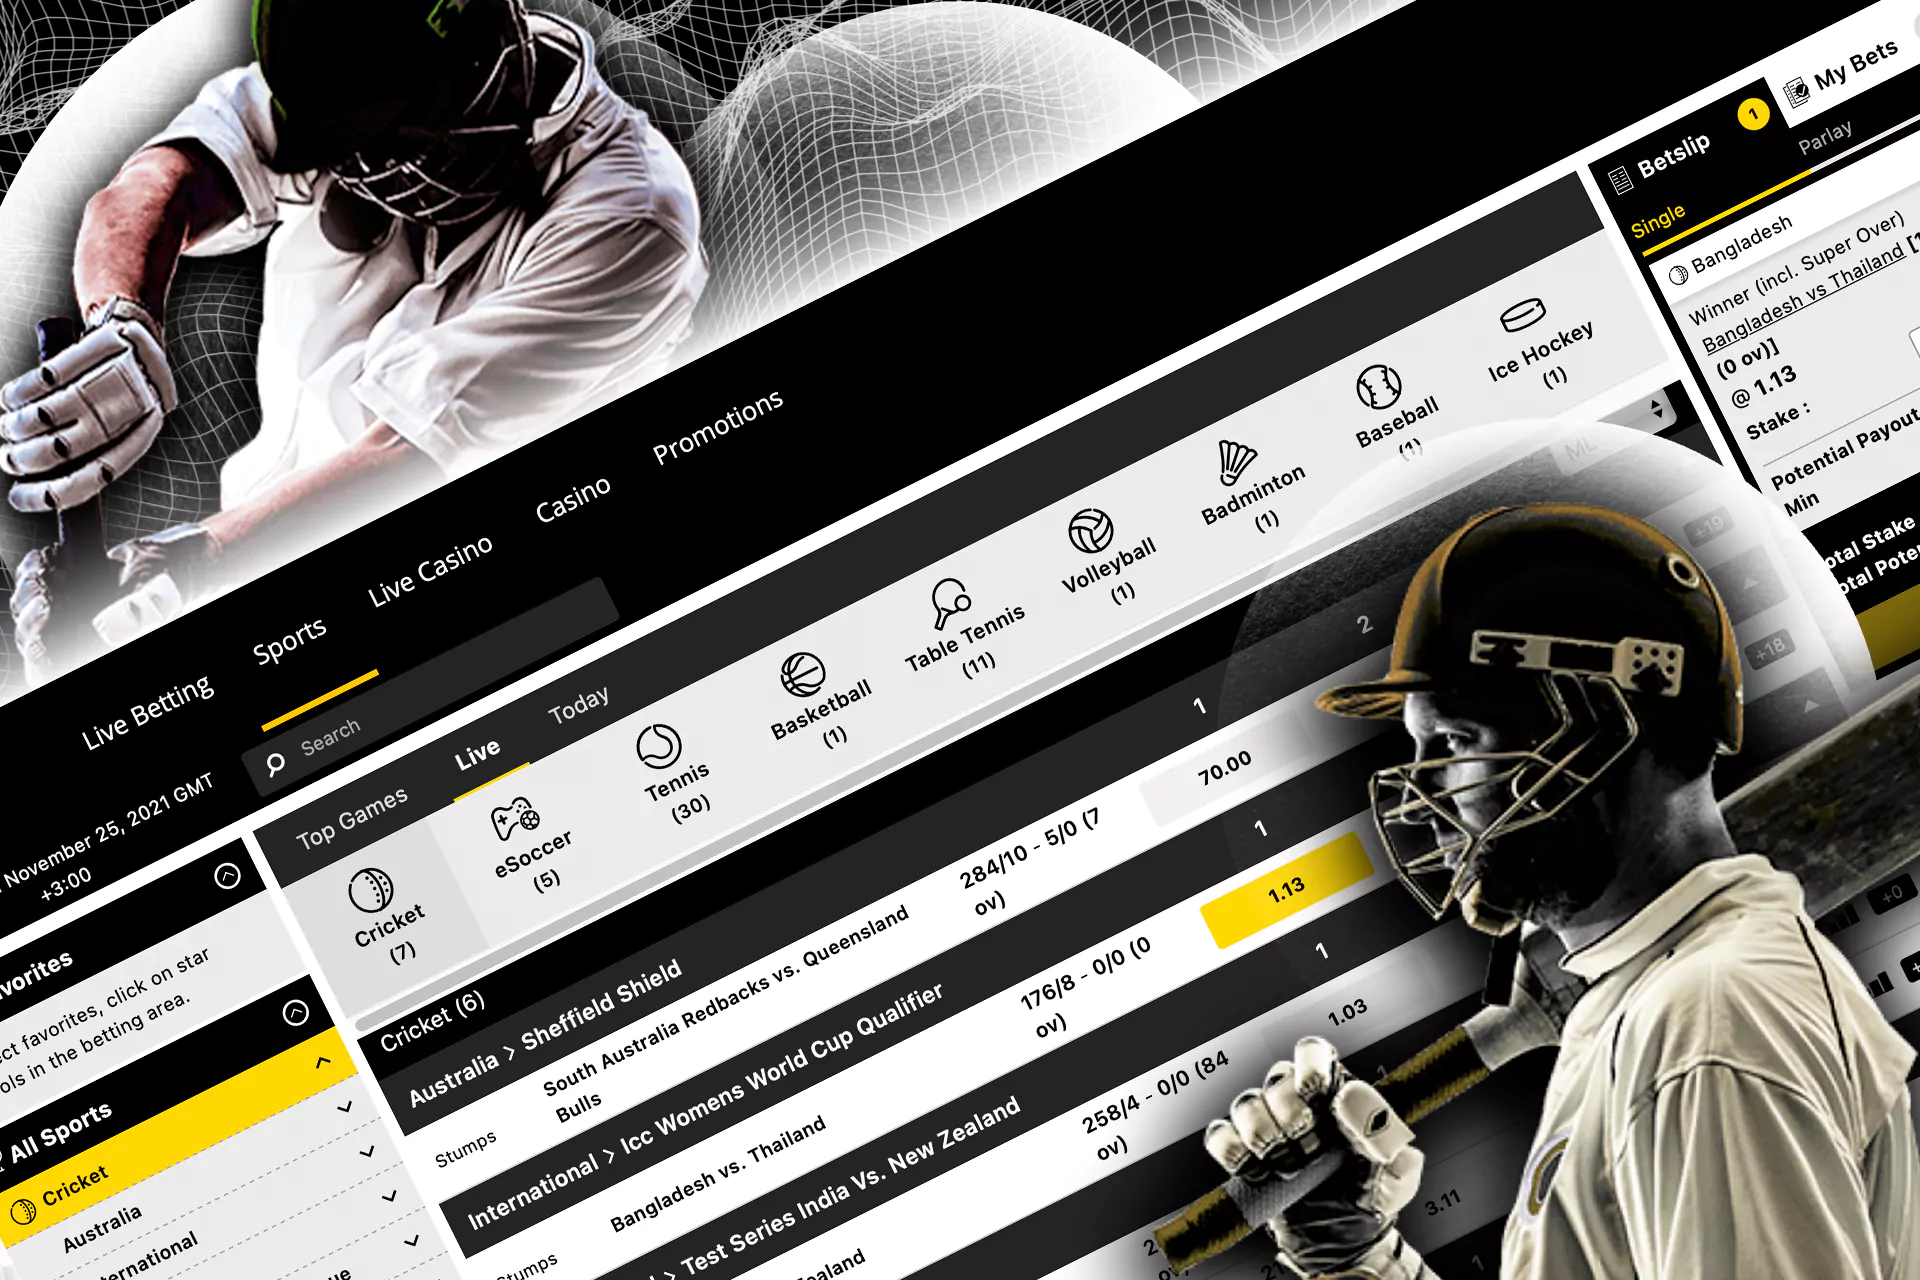 Choose any match and market and place a bet on cricket.